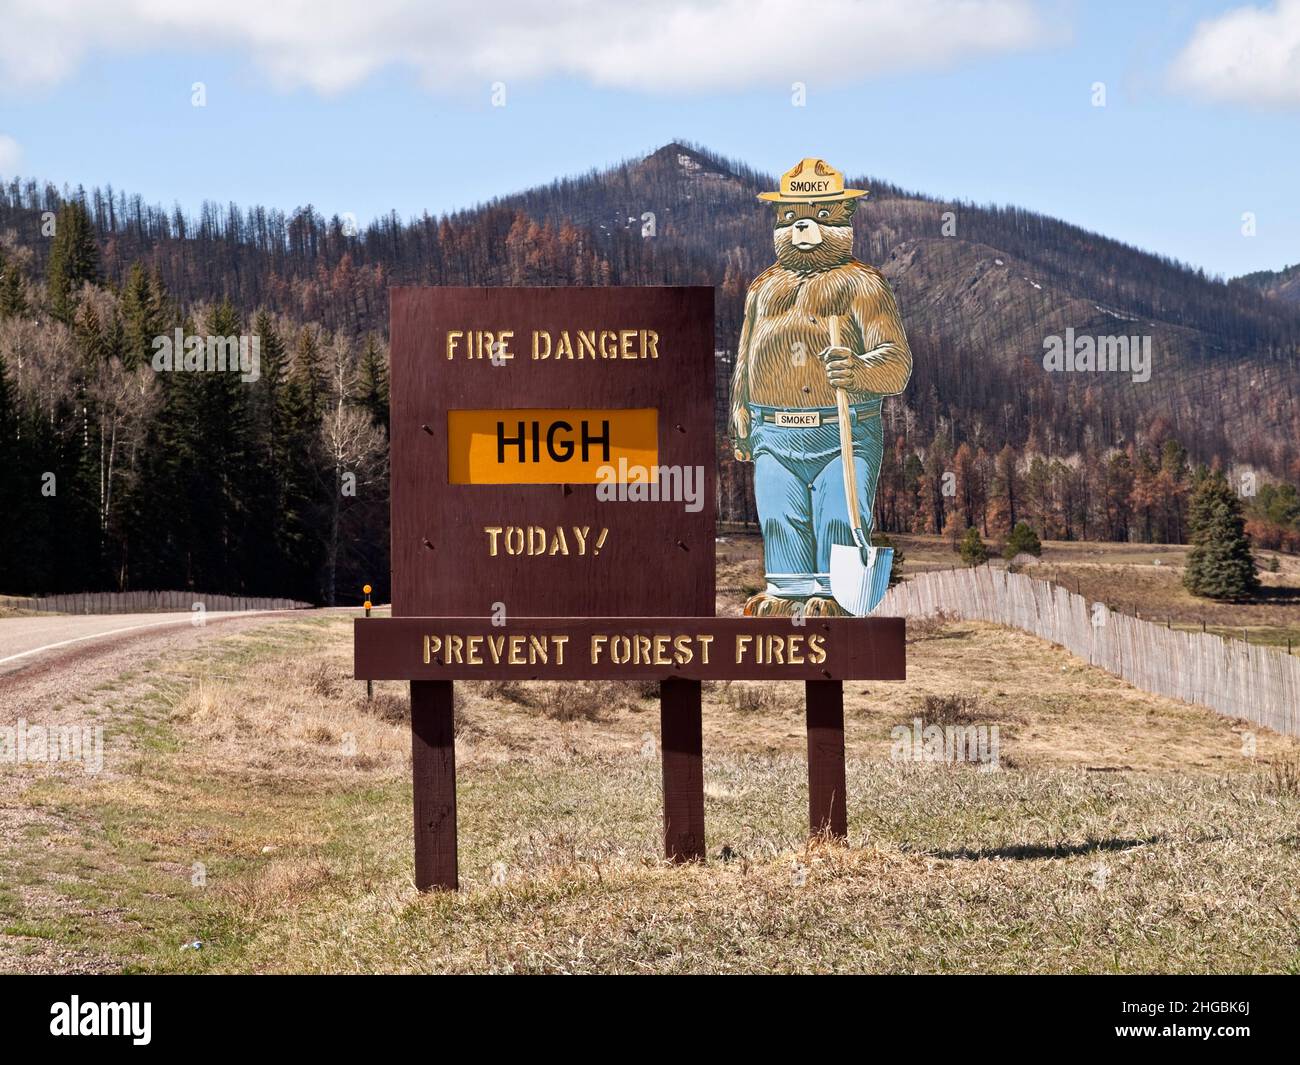 Smokey the Bear forest fire prevention sign warns tourists about high fire danger on April, 12, 2012 in Santa Fe, New Mexico, USA. Stock Photo